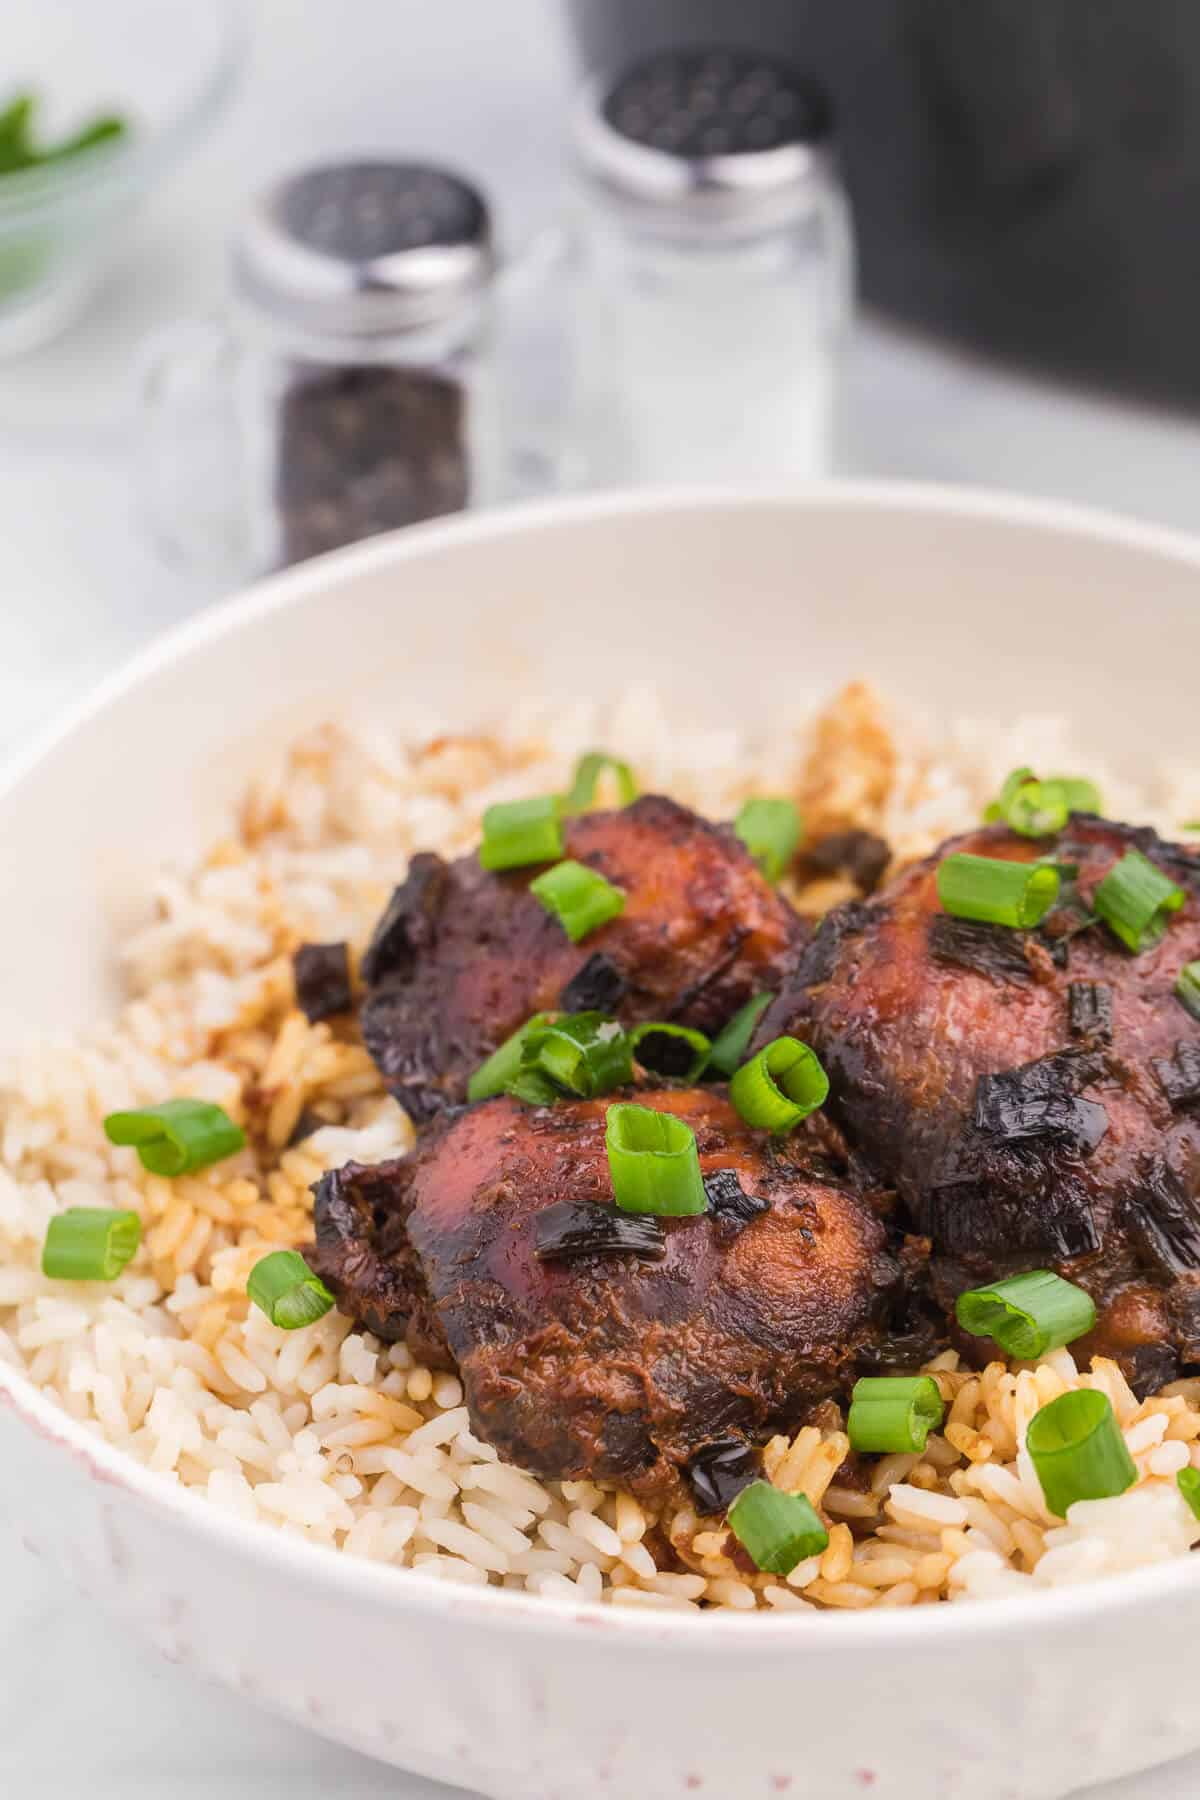 Peking Chicken - If you love Peking Duck, give the chicken version a try! It's tender, flavorful and cooked to perfection in the slow cooker.